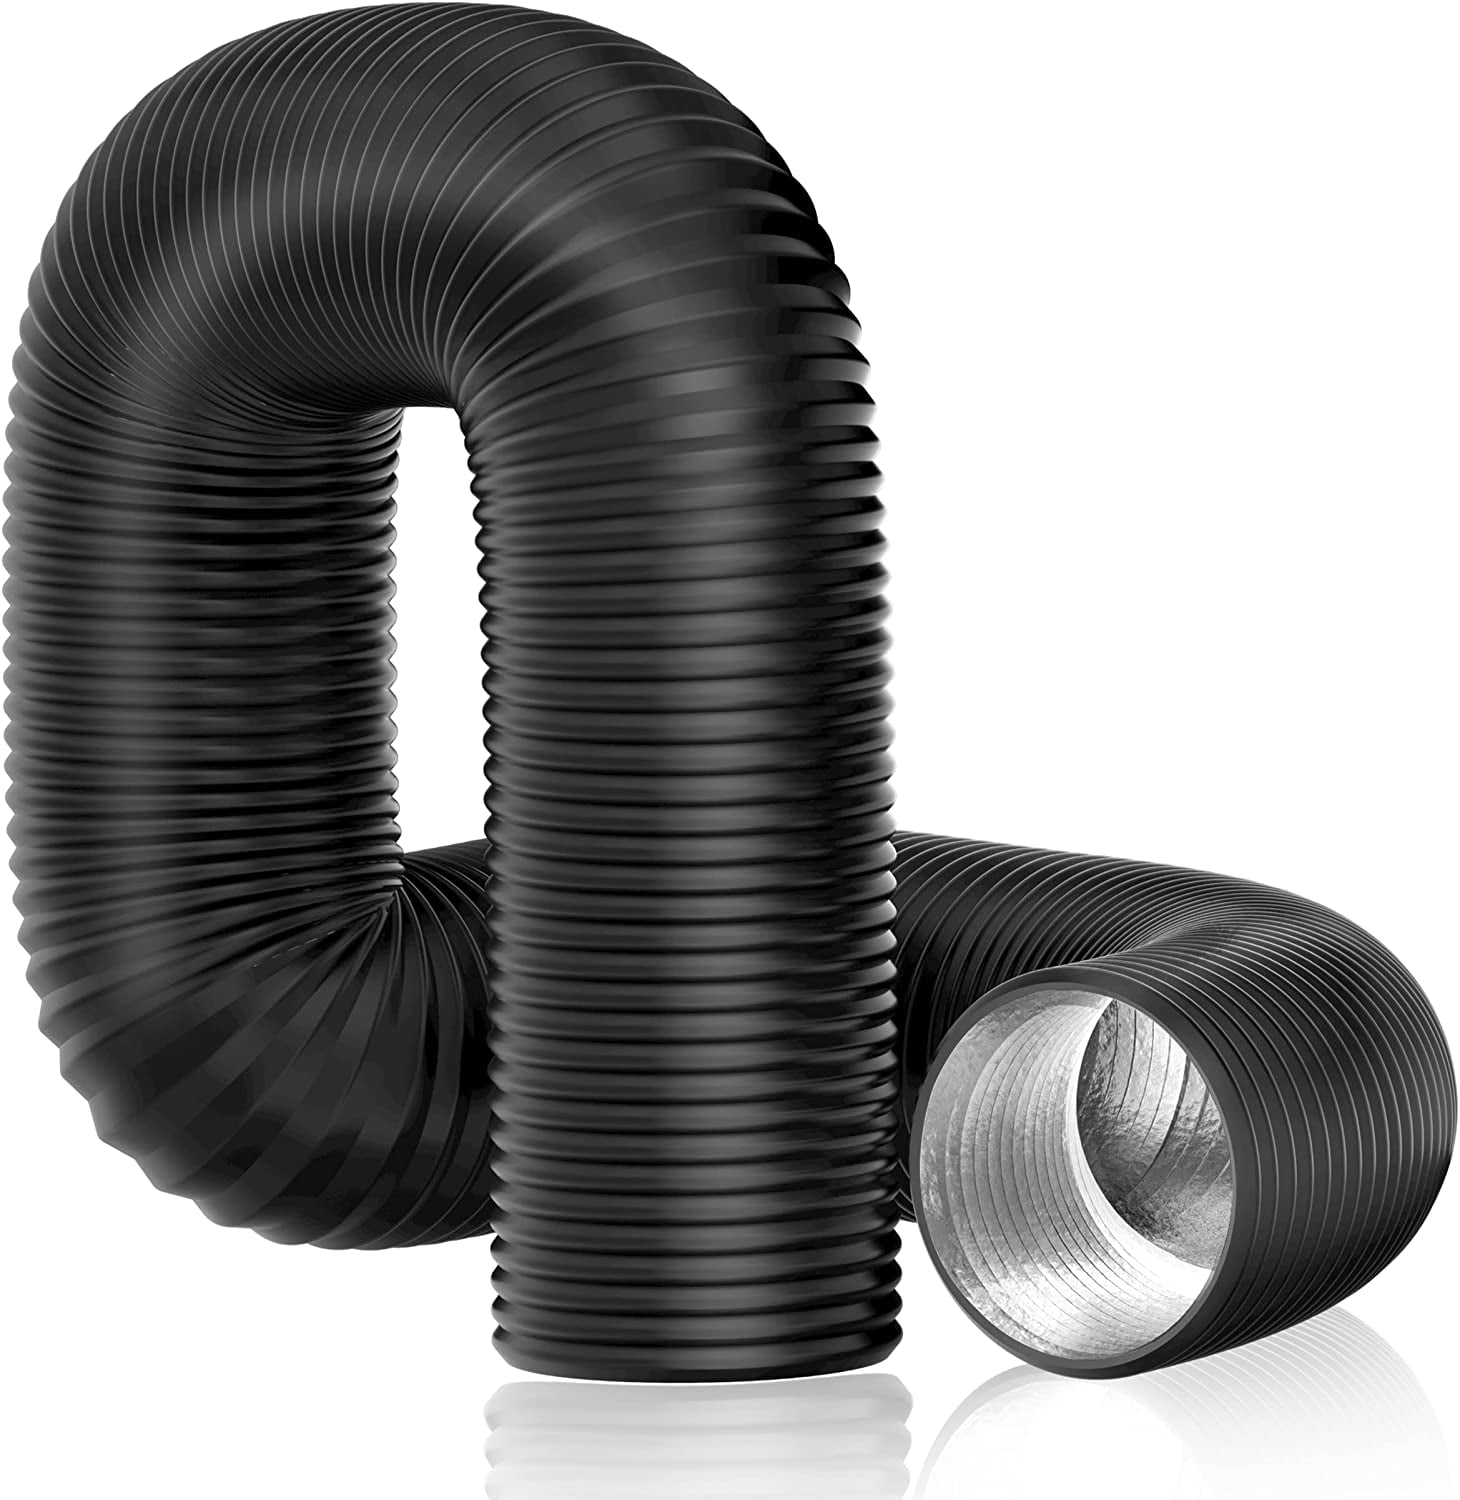 2/3m Aluminum Flexible Ducting Ventilation Pipe Exhaust Breather Hose Pipes Air 